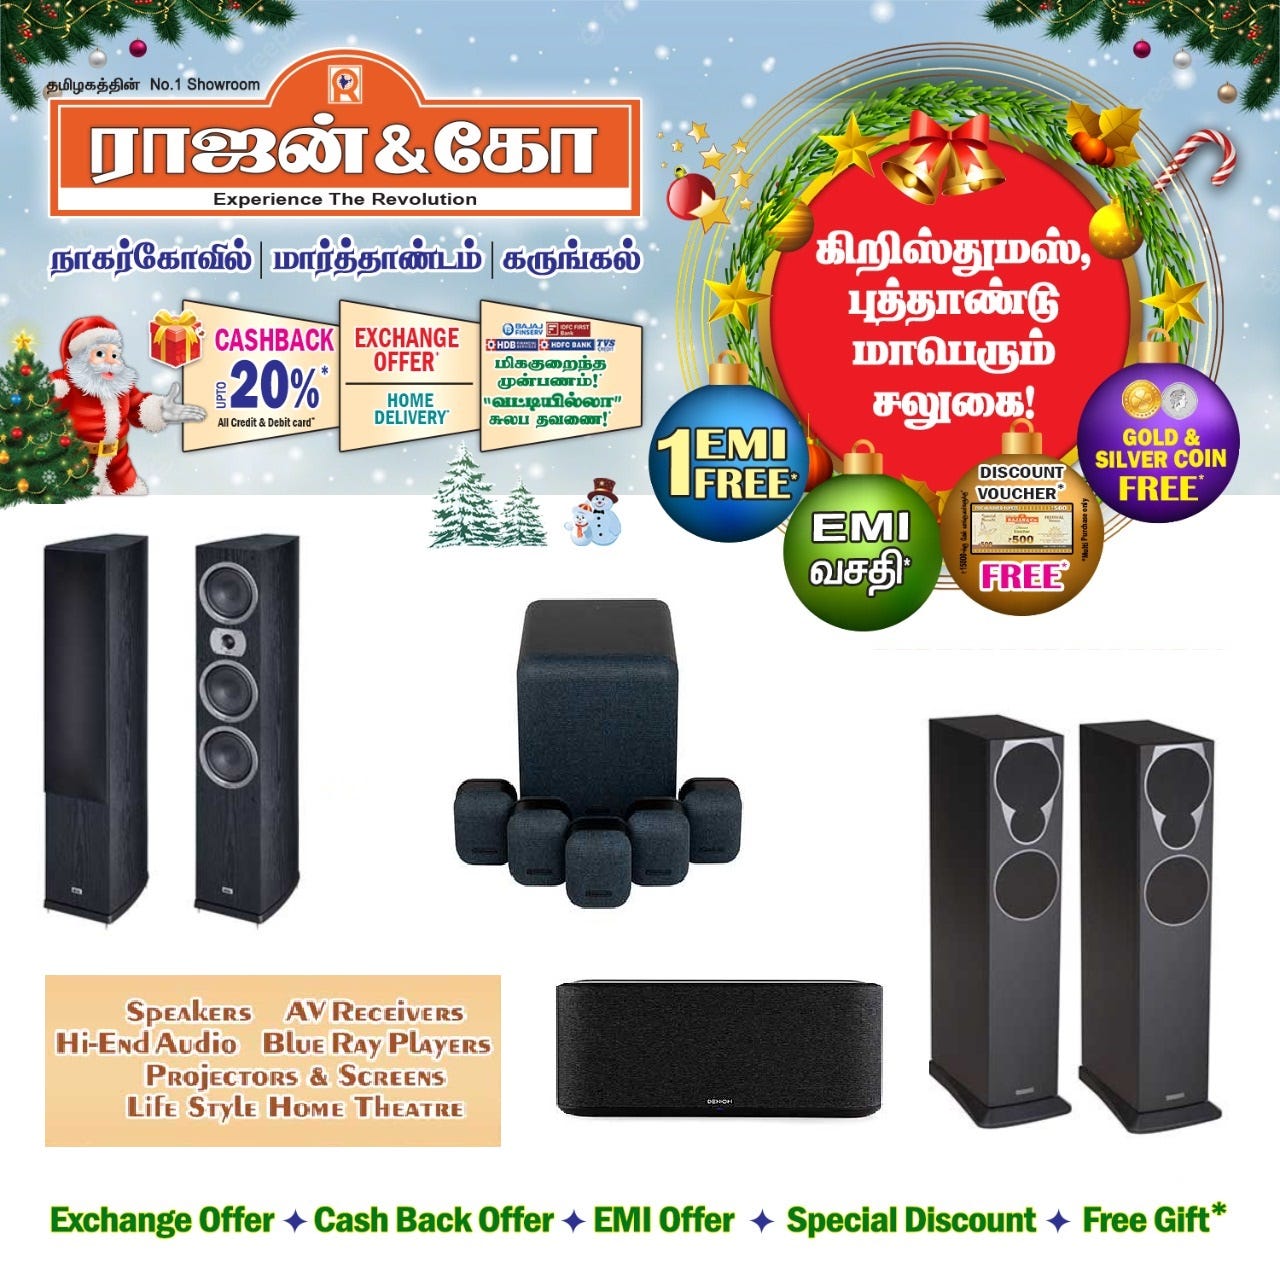 Best Home Appliances Showroom In Nagercoil, Best Home Theatres In Tamil Nadu, Best Home Theatre Showroom In Nagercoil, Home Theatre In Nagercoil, Rajan & Co